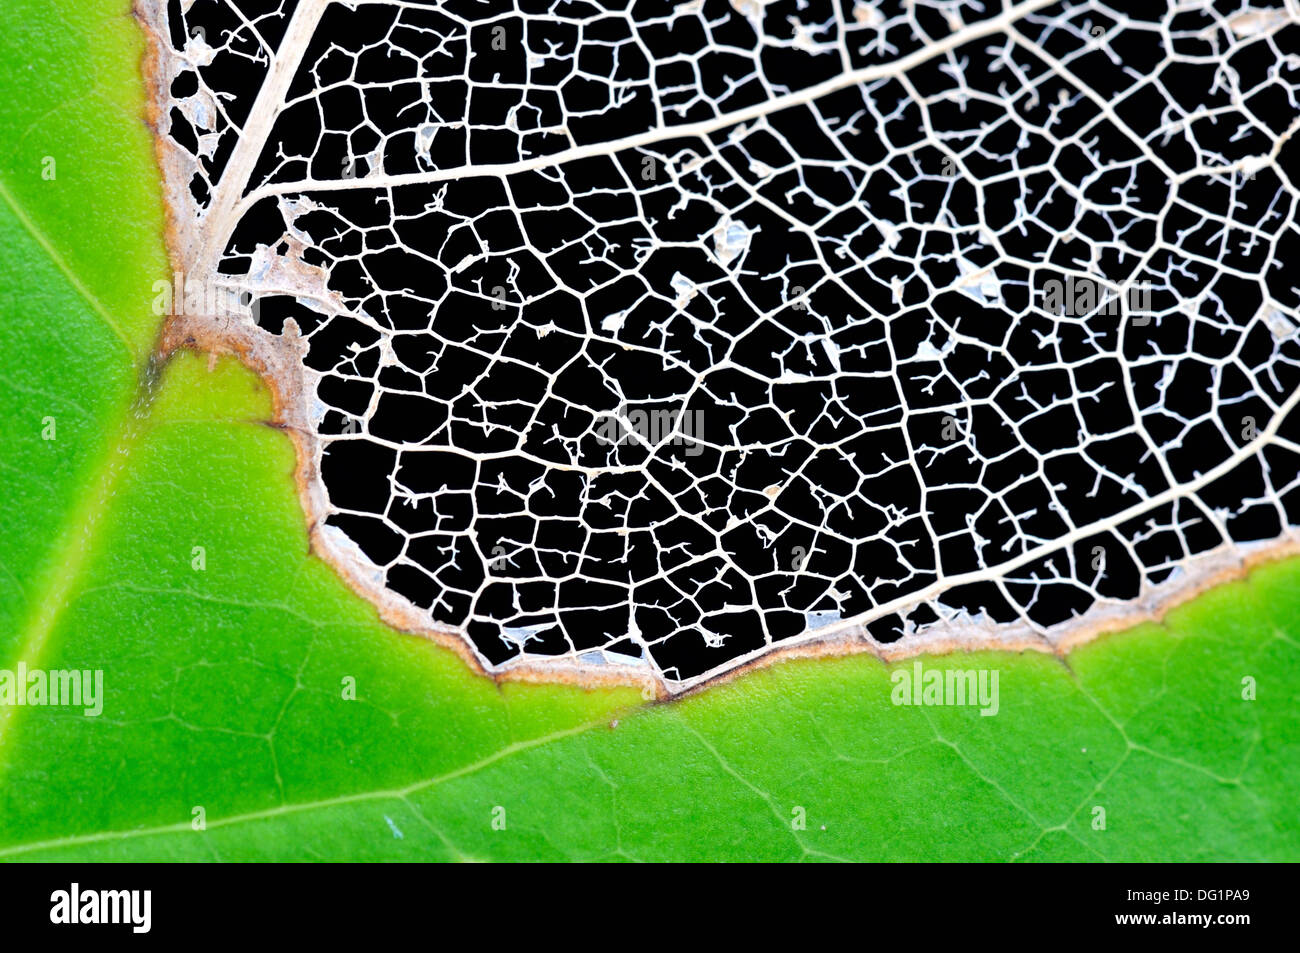 Delicate veins of a half decayed leaf. Stock Photo